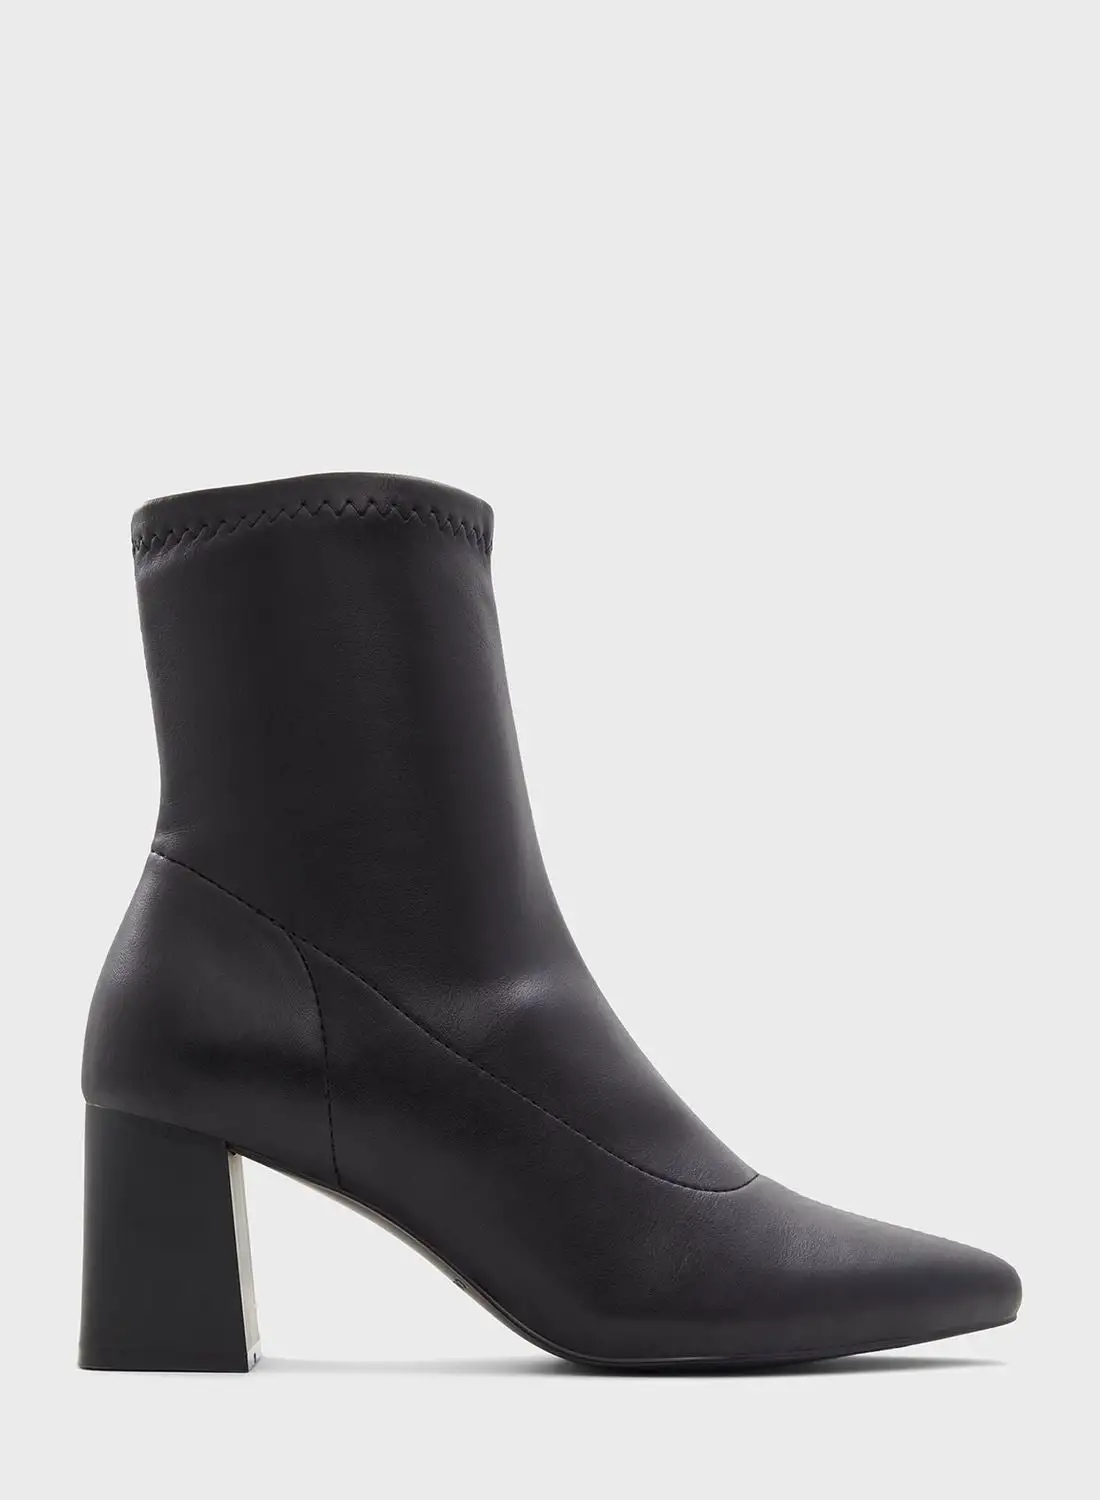 CALL IT SPRING Ameeka Ankle Boots